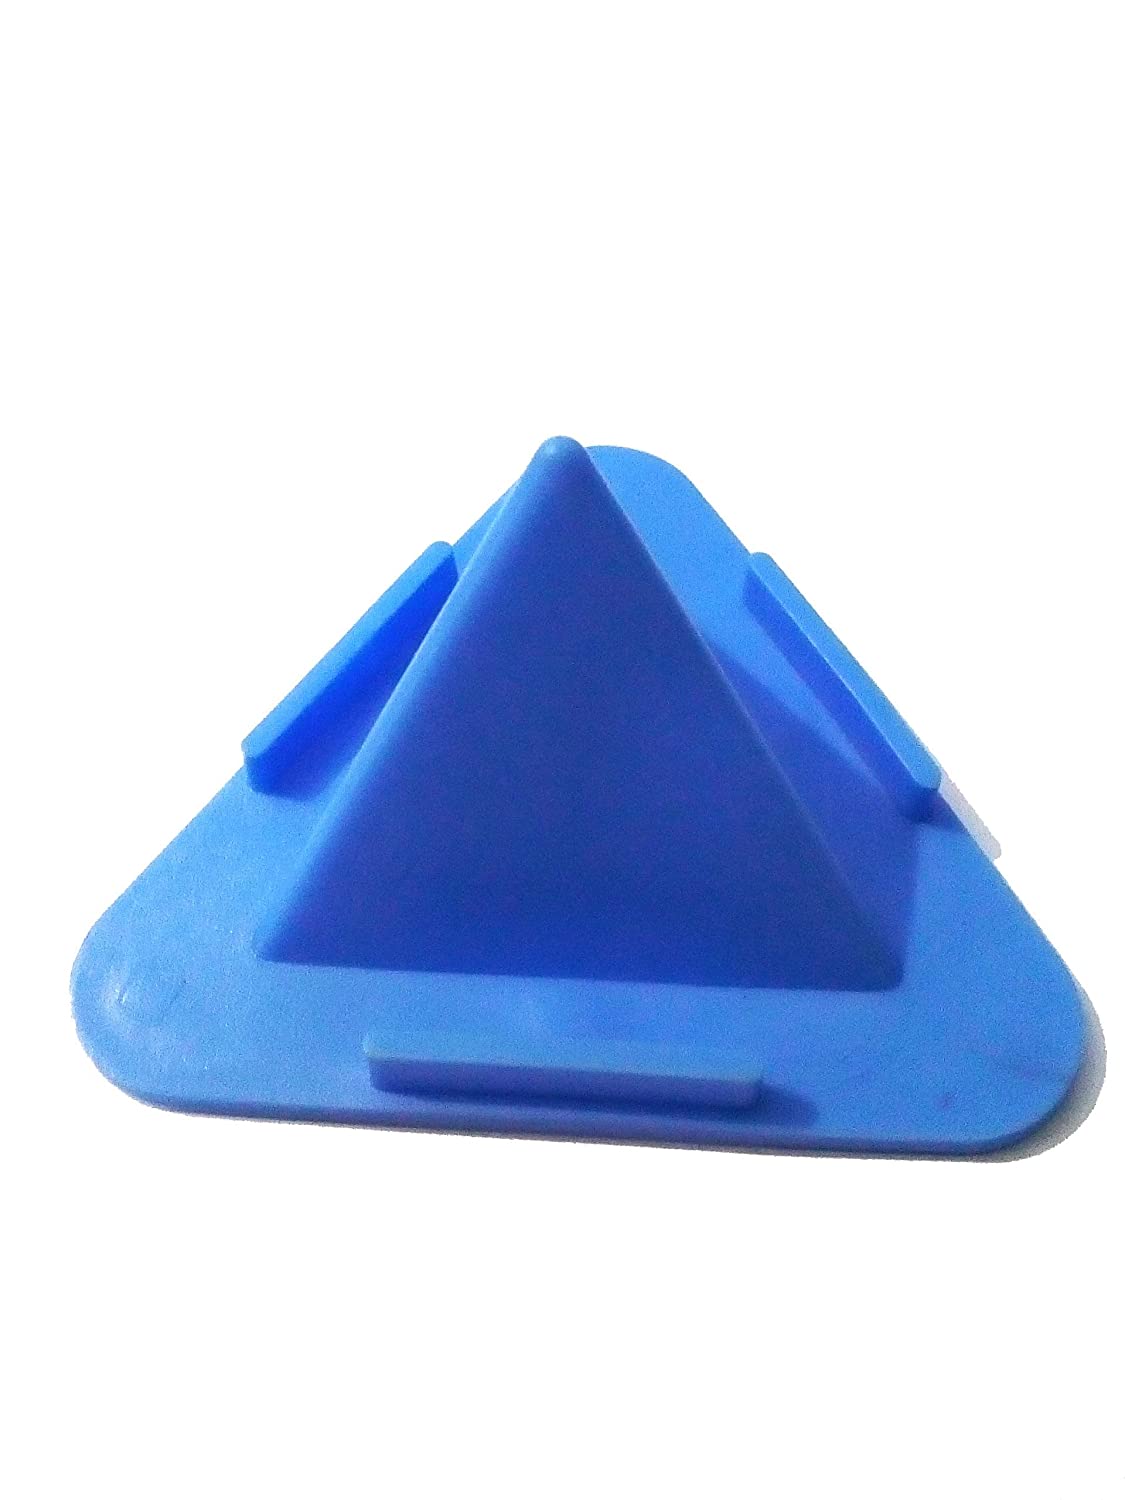 Mobile Holder, Phone Holder For Car, Phone Stand, Mobile Stand Pyramid Desk Table Triangle Shape Multi Angle (pack Of 2)